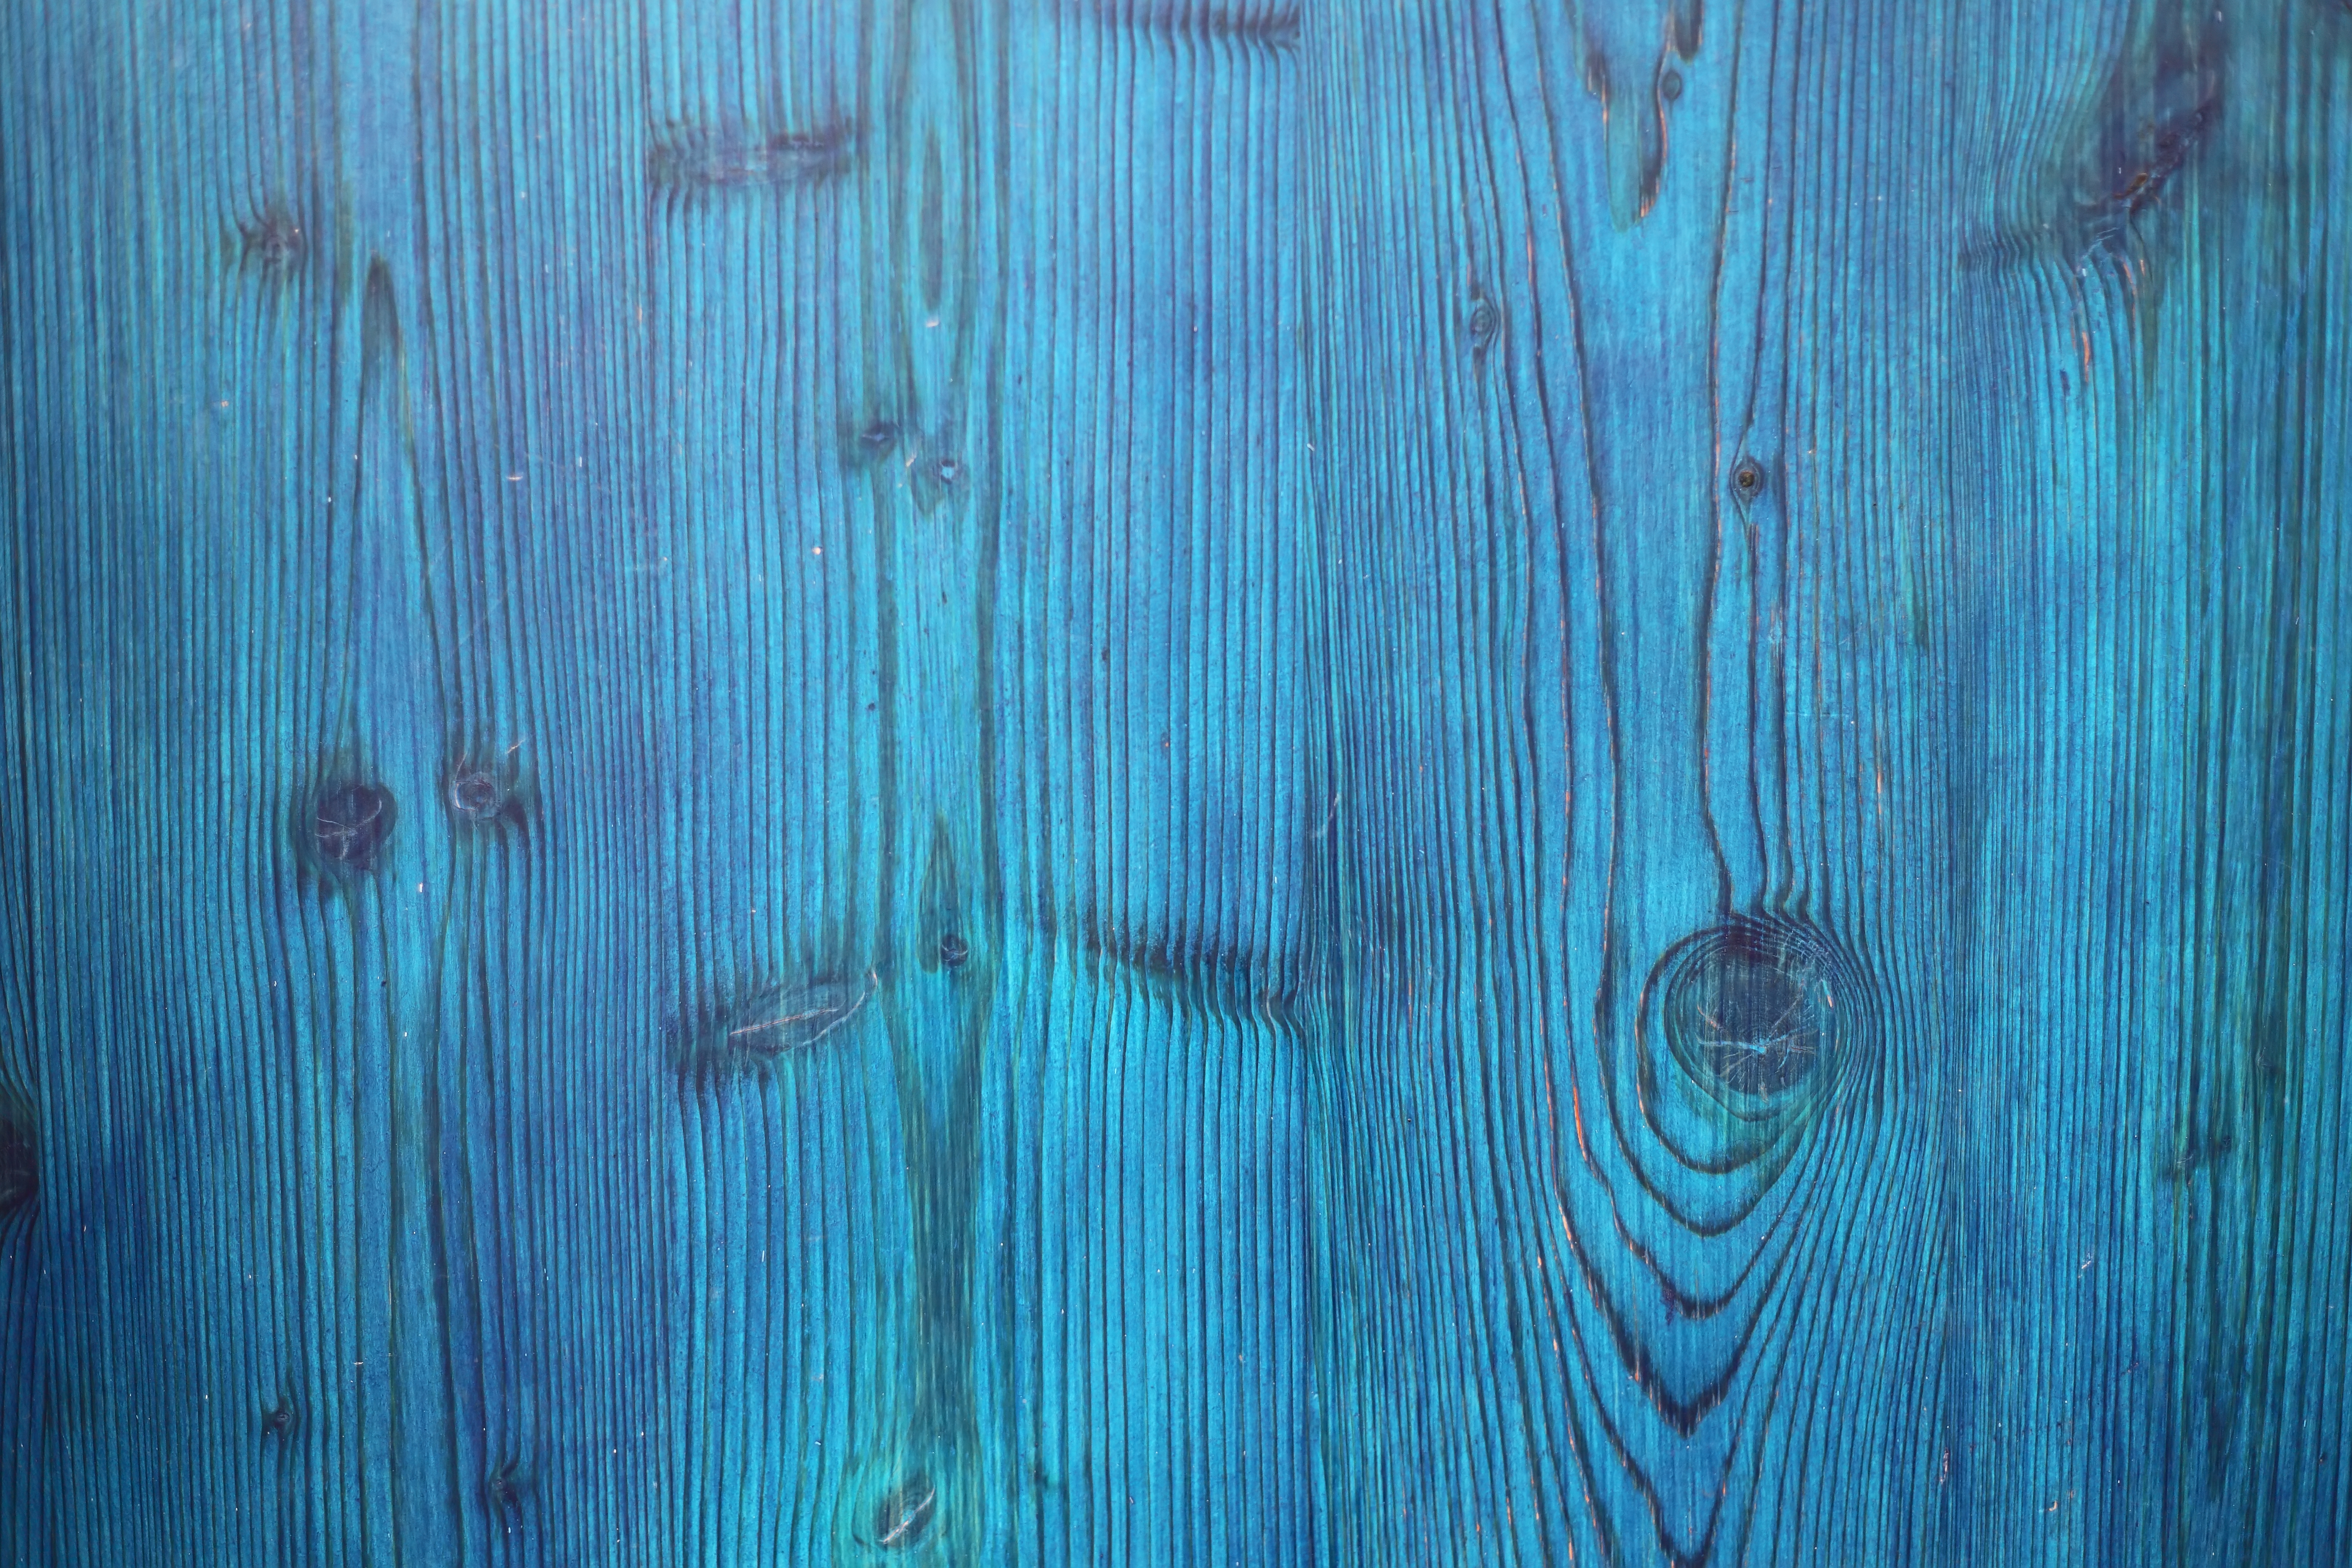 textures, planks, board, blue, wood, wooden, tree, texture, surface